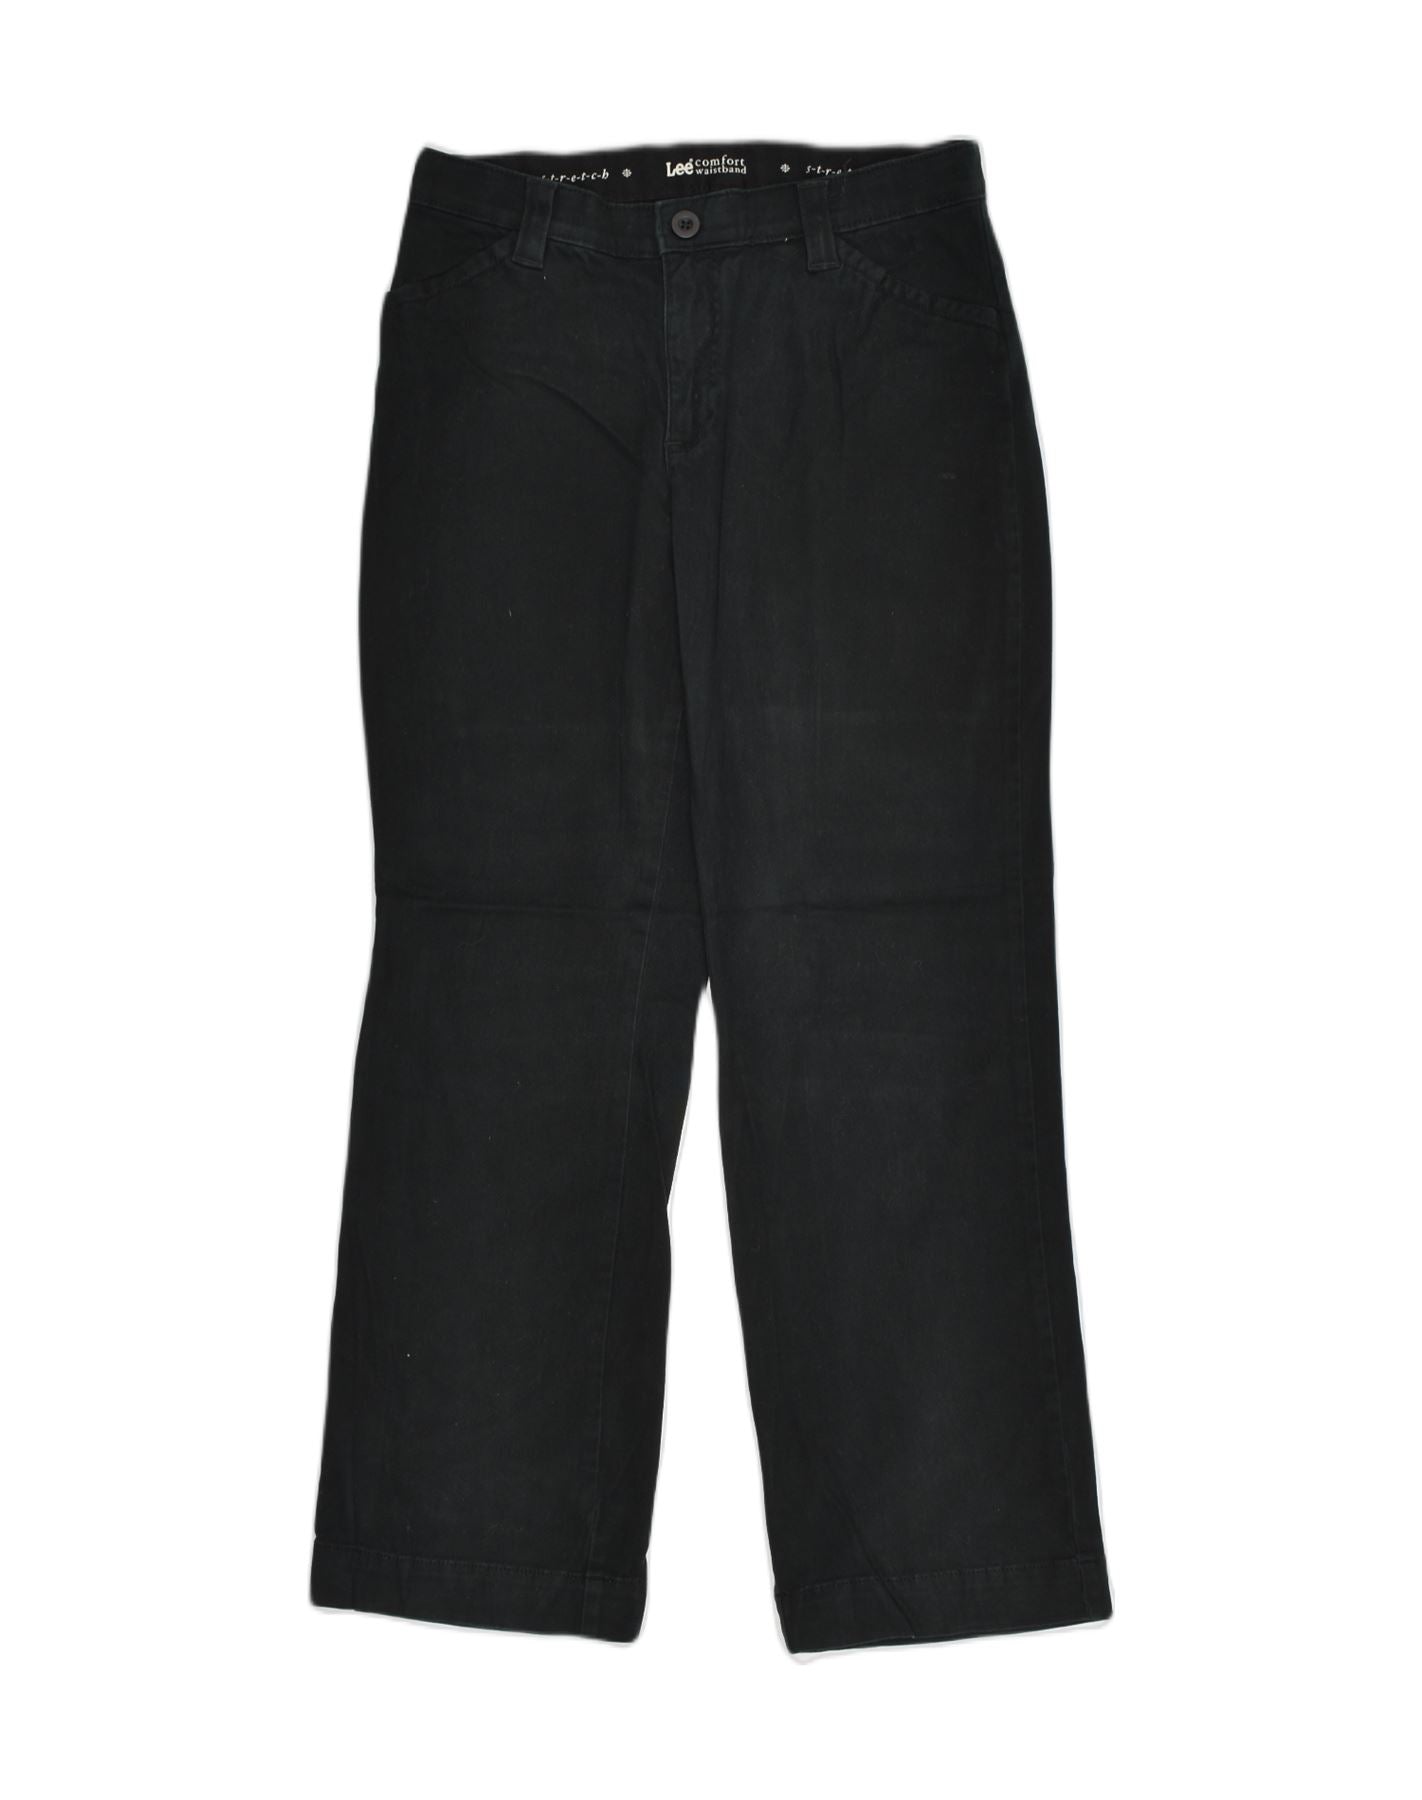 LEE Womens Comfort Fit Straight Casual Trousers US 8 Medium W29 L28 Black, Vintage & Second-Hand Clothing Online